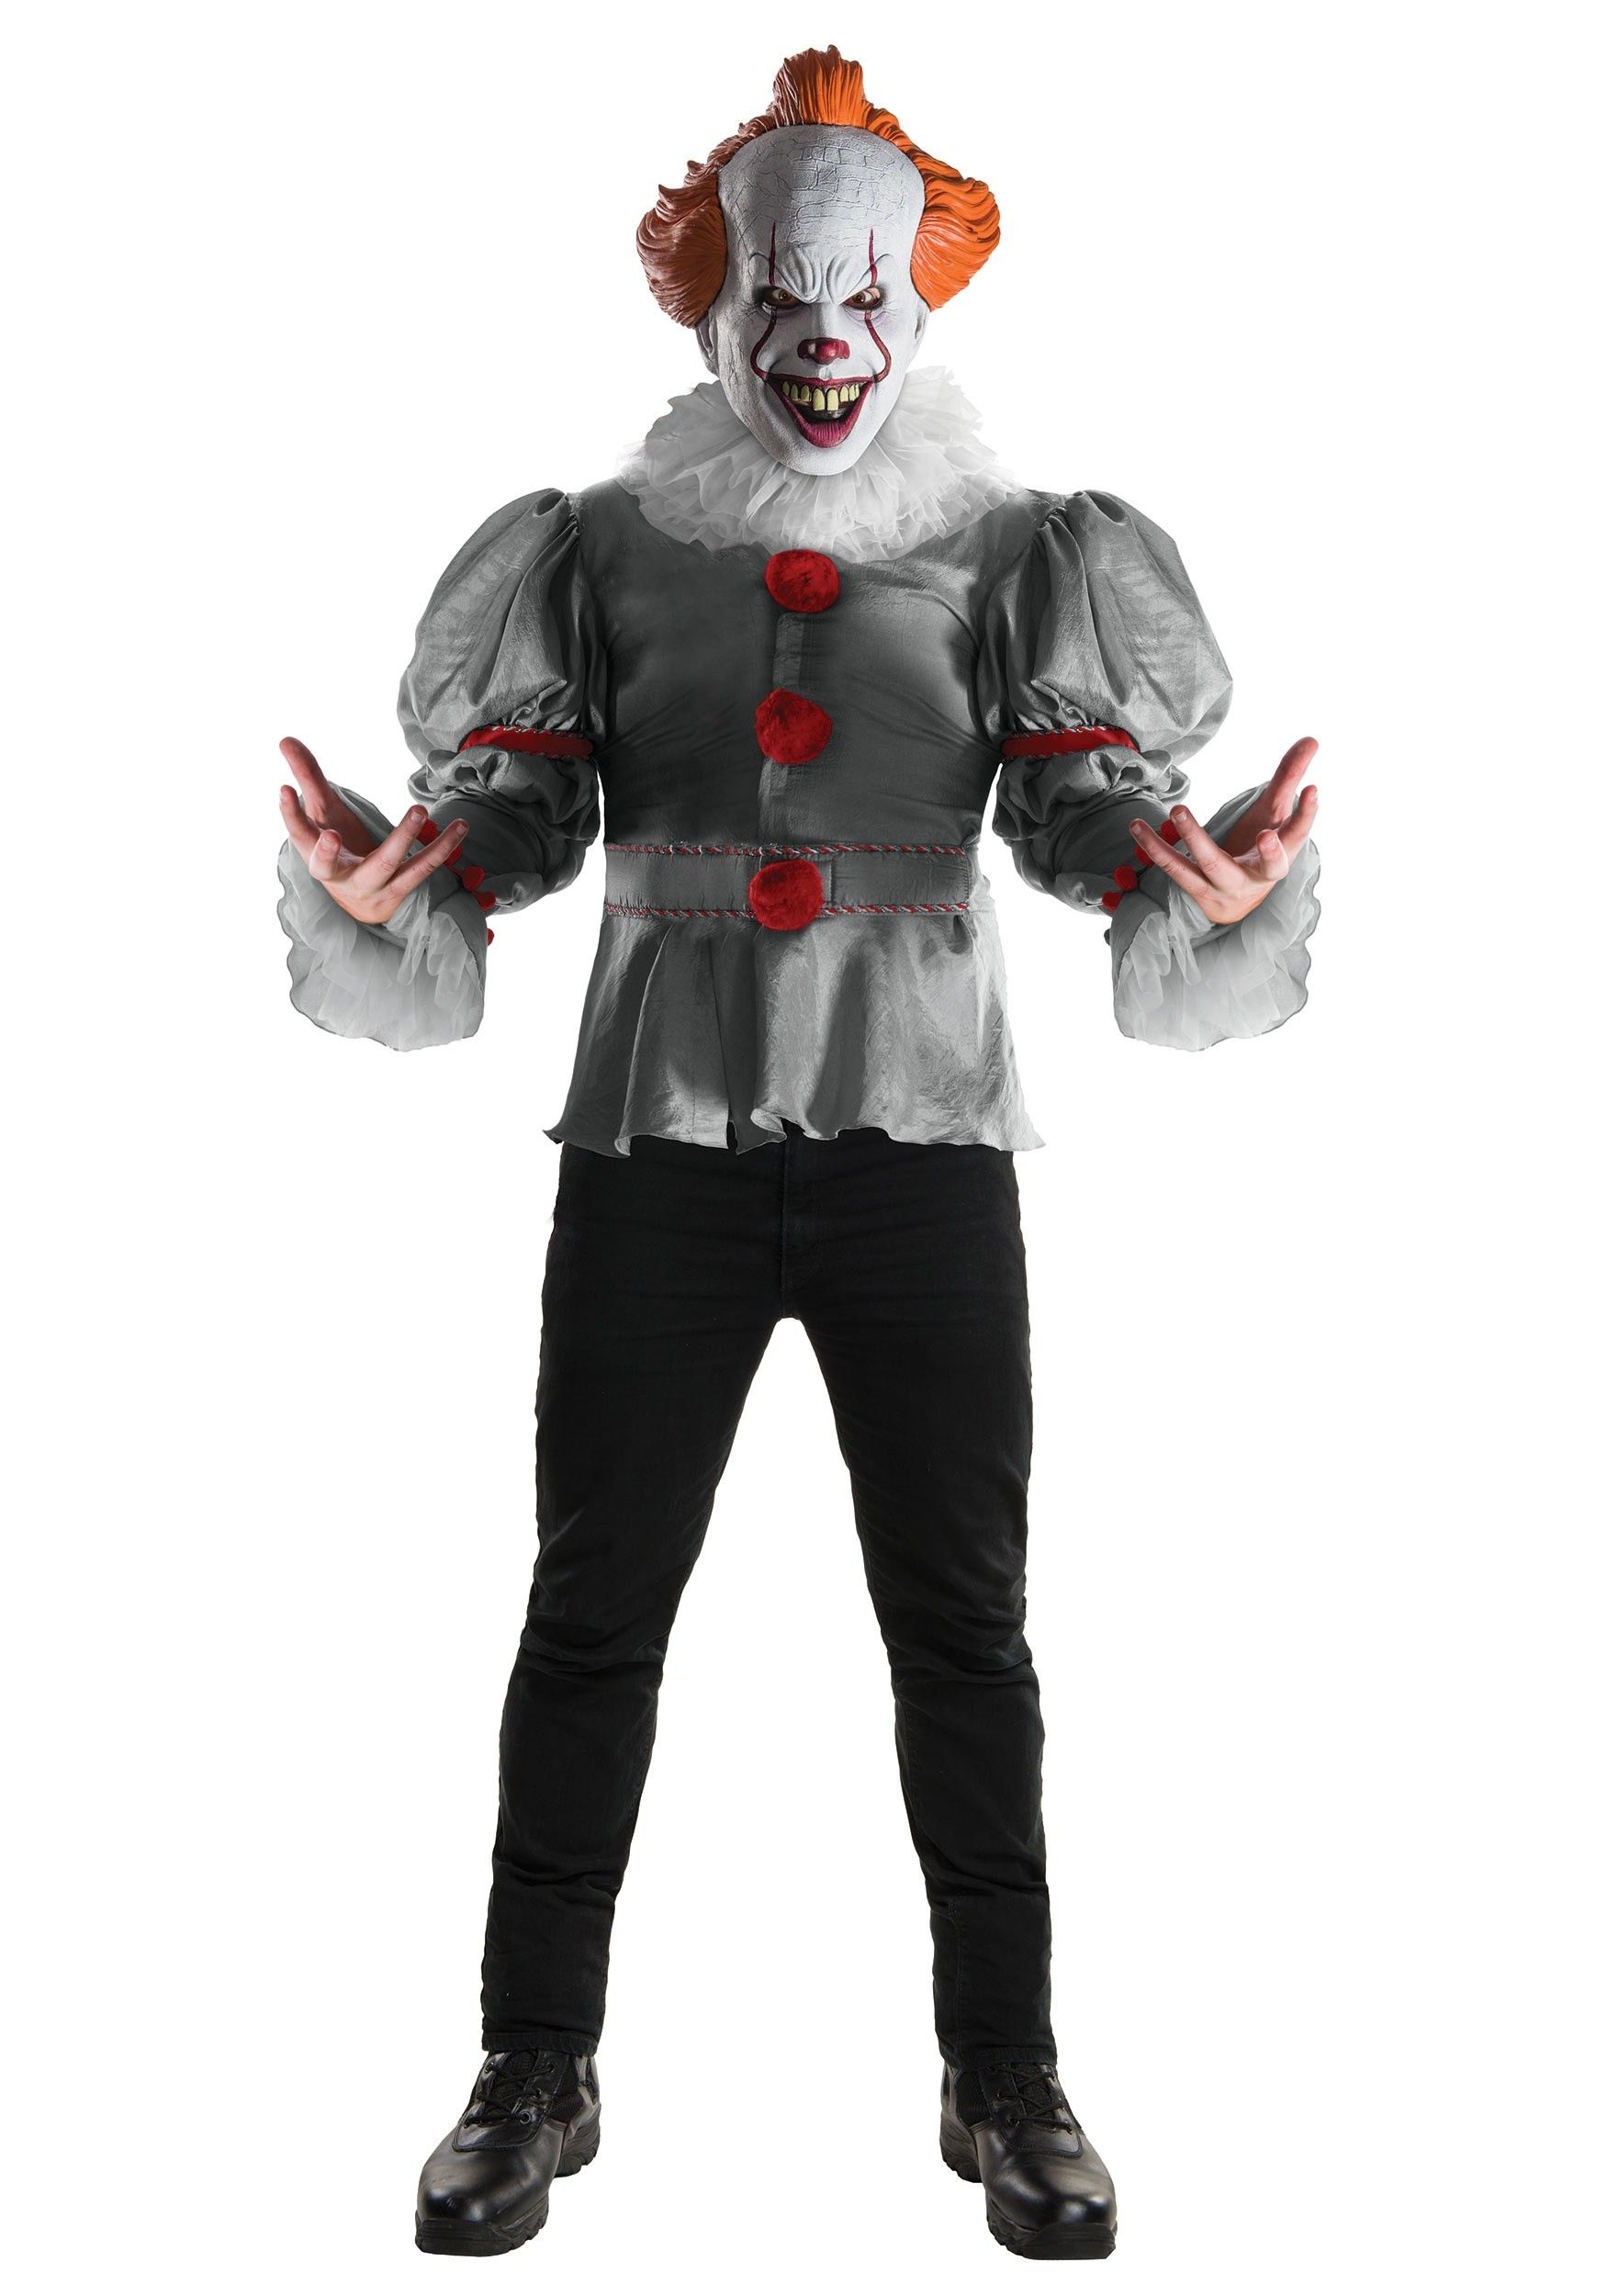 Ghoulish Adult Ice S-cream Clown Costume Mask - - Multicolored : Target